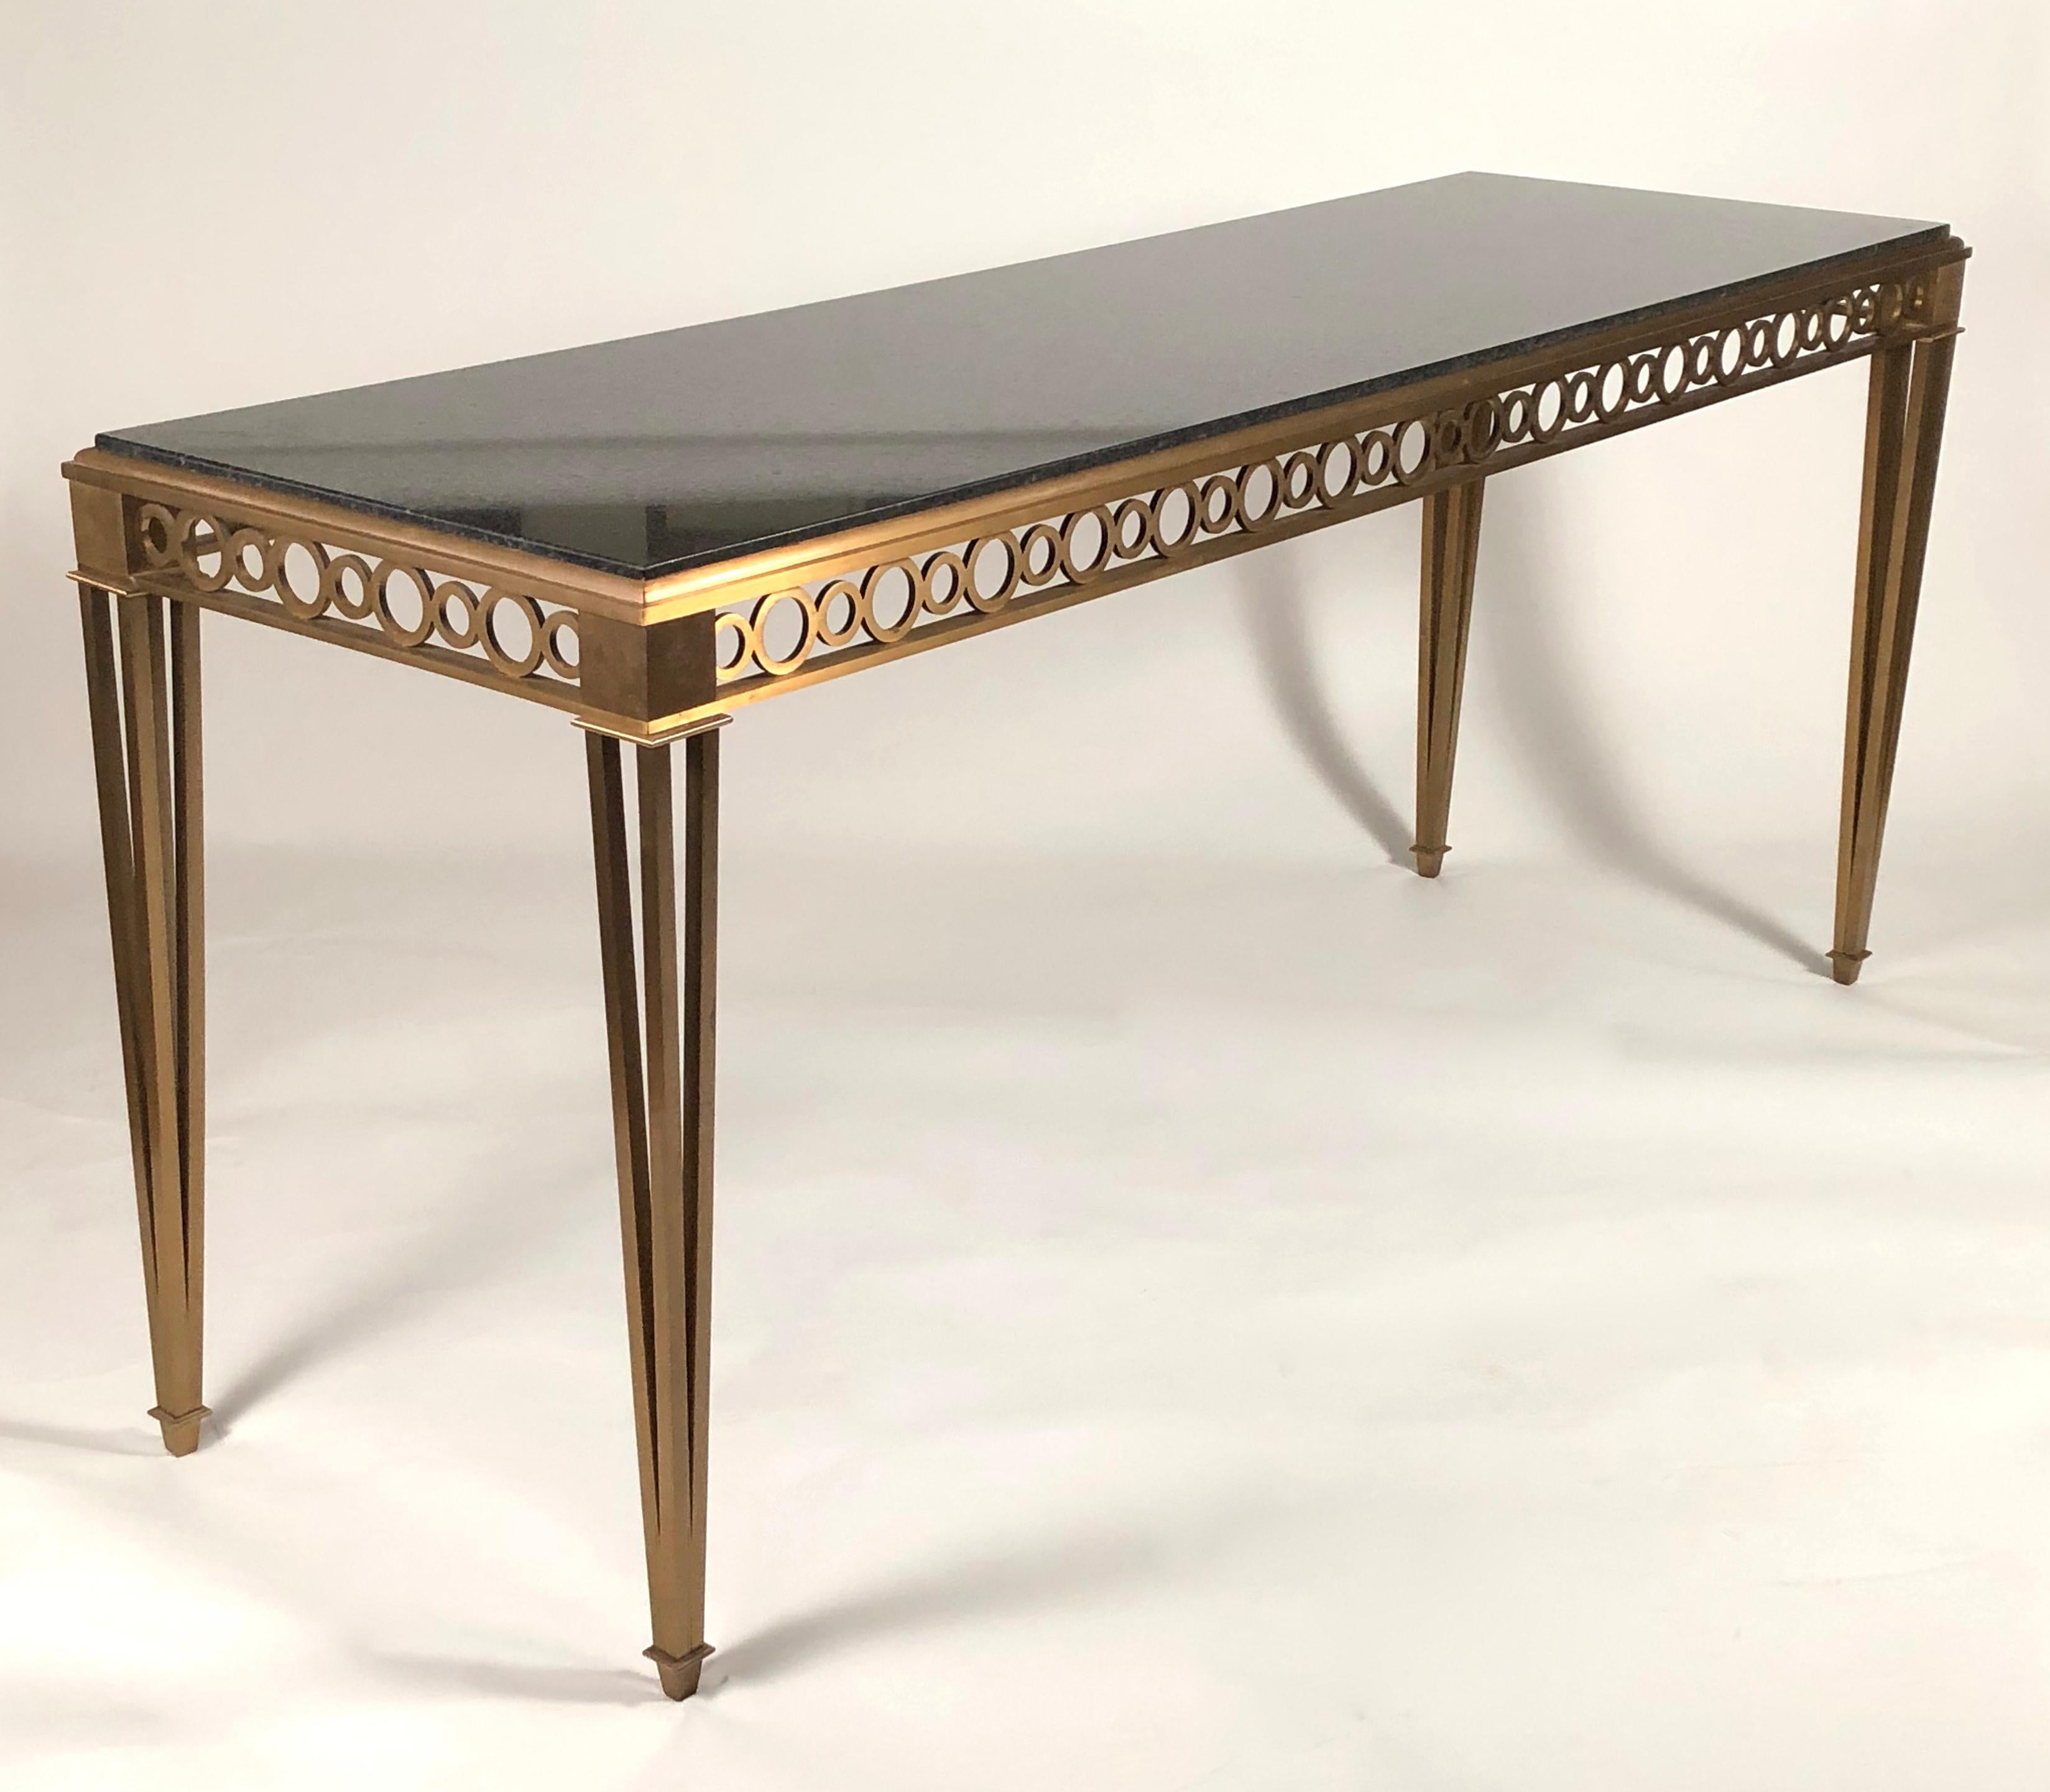 A chic and beautifully made solid brass and polished black granite console table attributed to Paul M. Jones, American, circa 1950-60, of rectangular form, the polished black granite inset top above a frieze of reticulated circles in alternating